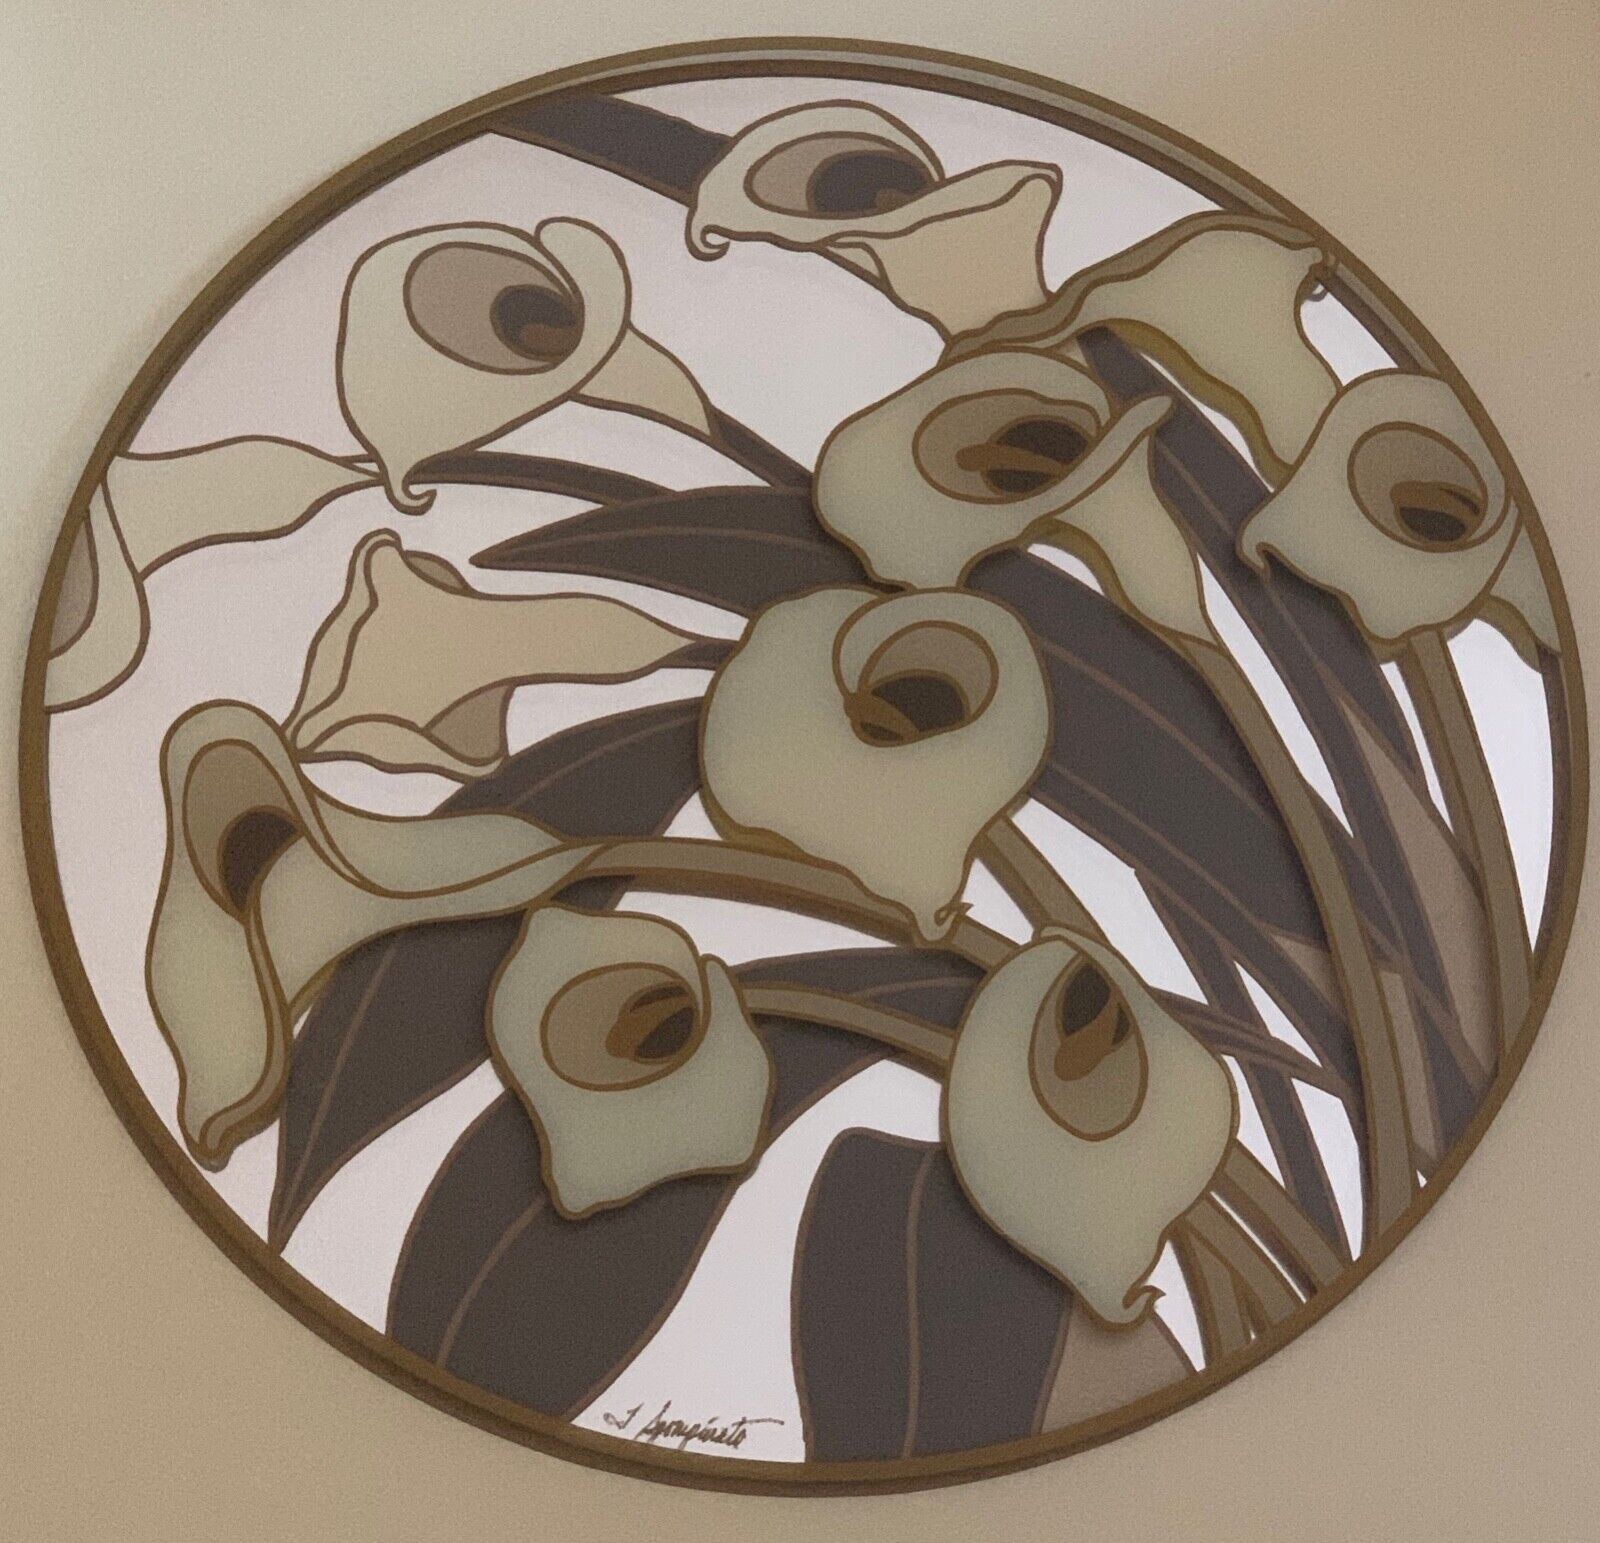 Vintage 70s Academy Arts Calla Lily Dimensional Mirror Art Wall Hanging Modern